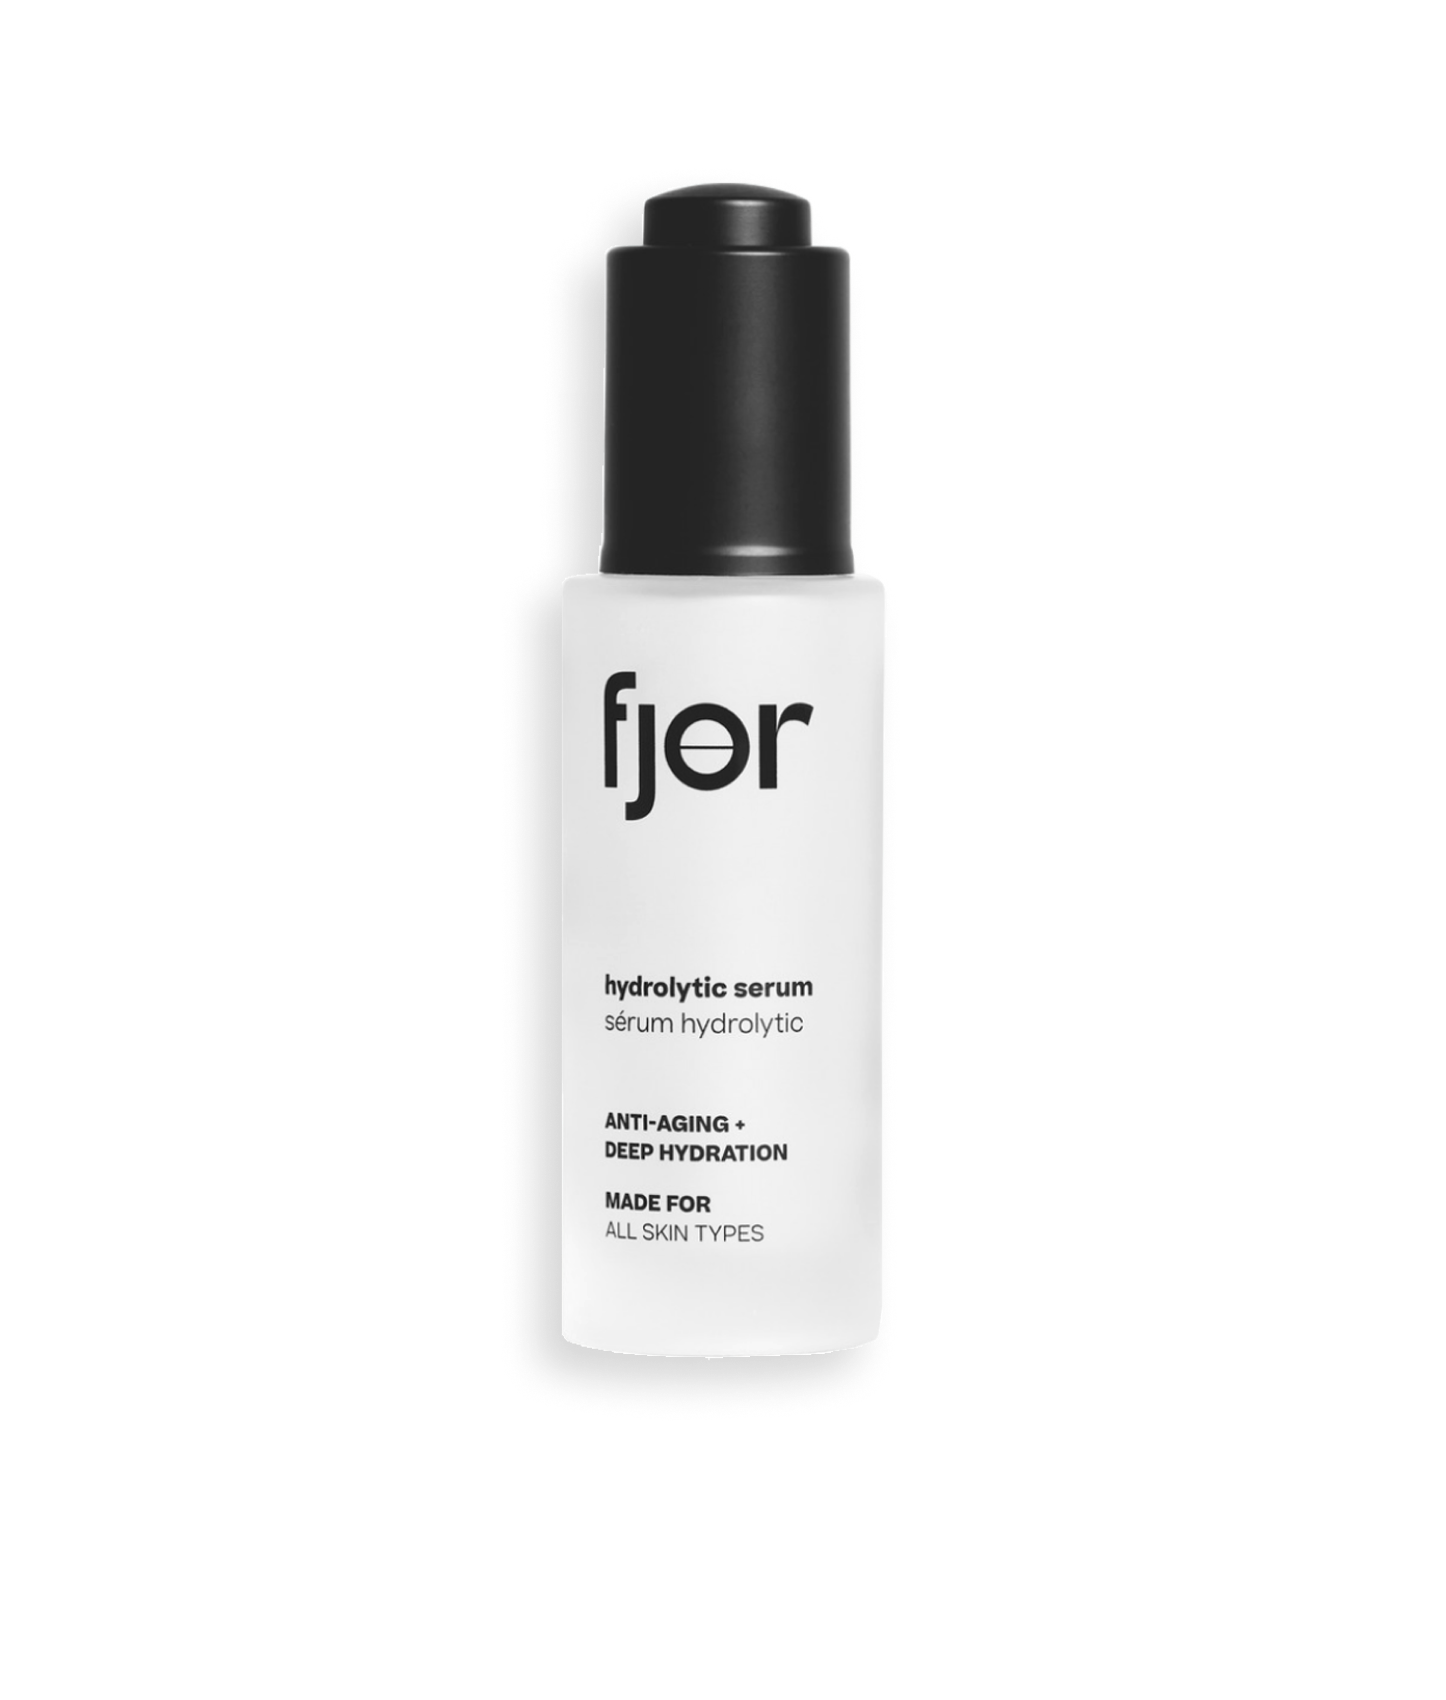 cutout image of the fjor hydrolytic serum glass bottle with a push dropper